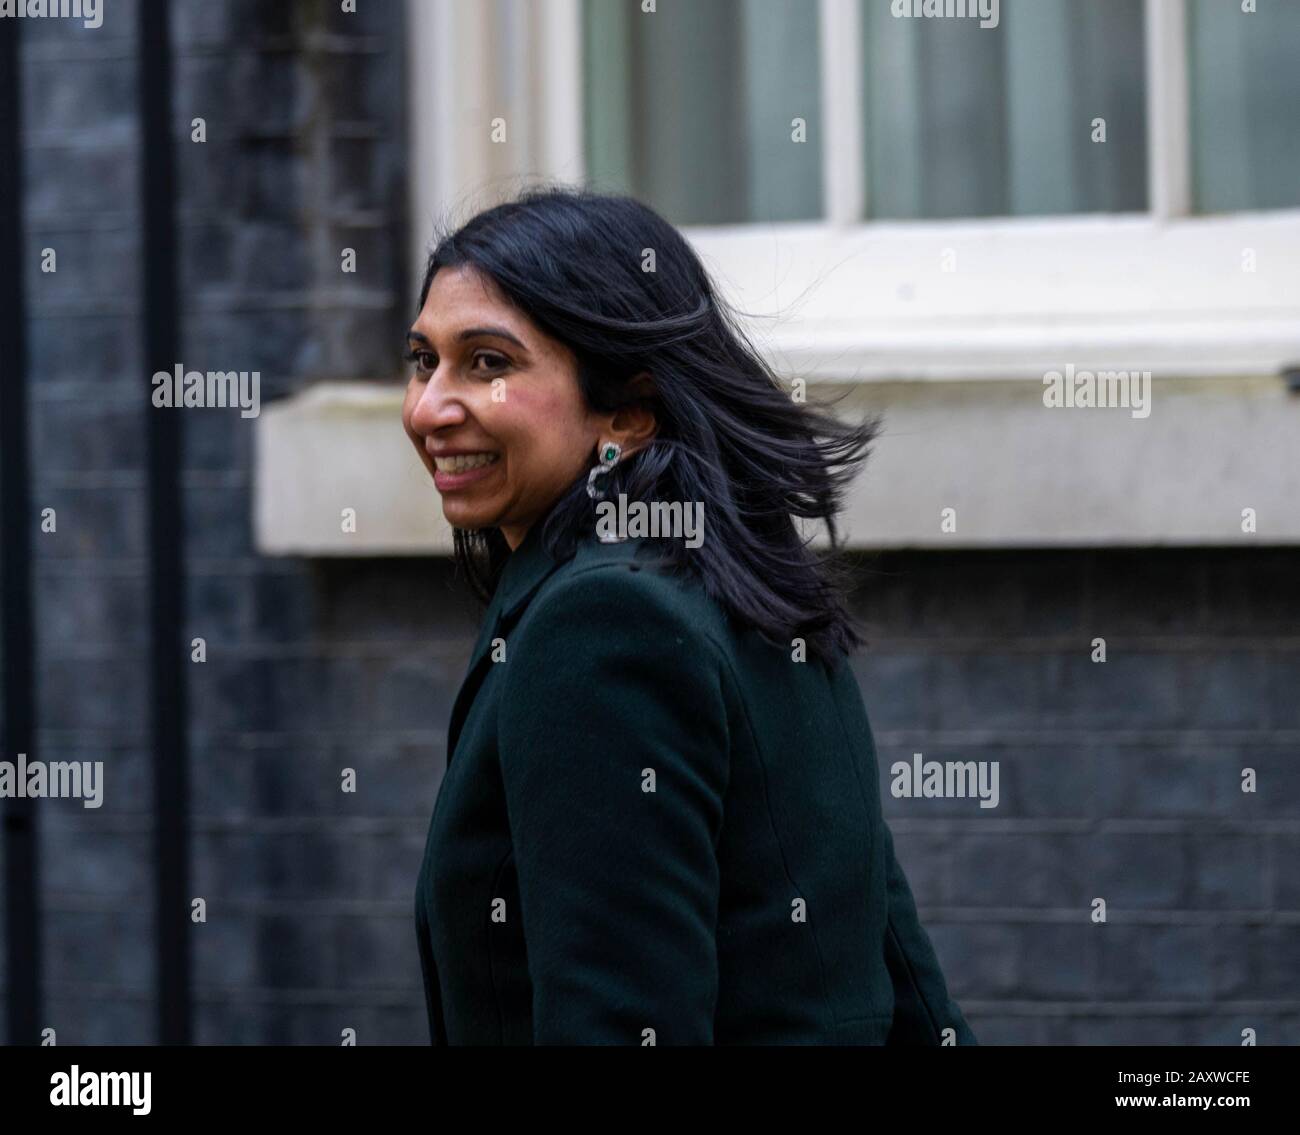 London, UK. 13th Feb, 2020. Suella Braverman arrives at 10 Downing Street, London to be appointed Attorney General as part of the cabinet reshuffle Credit: Ian Davidson/Alamy Live News Stock Photo